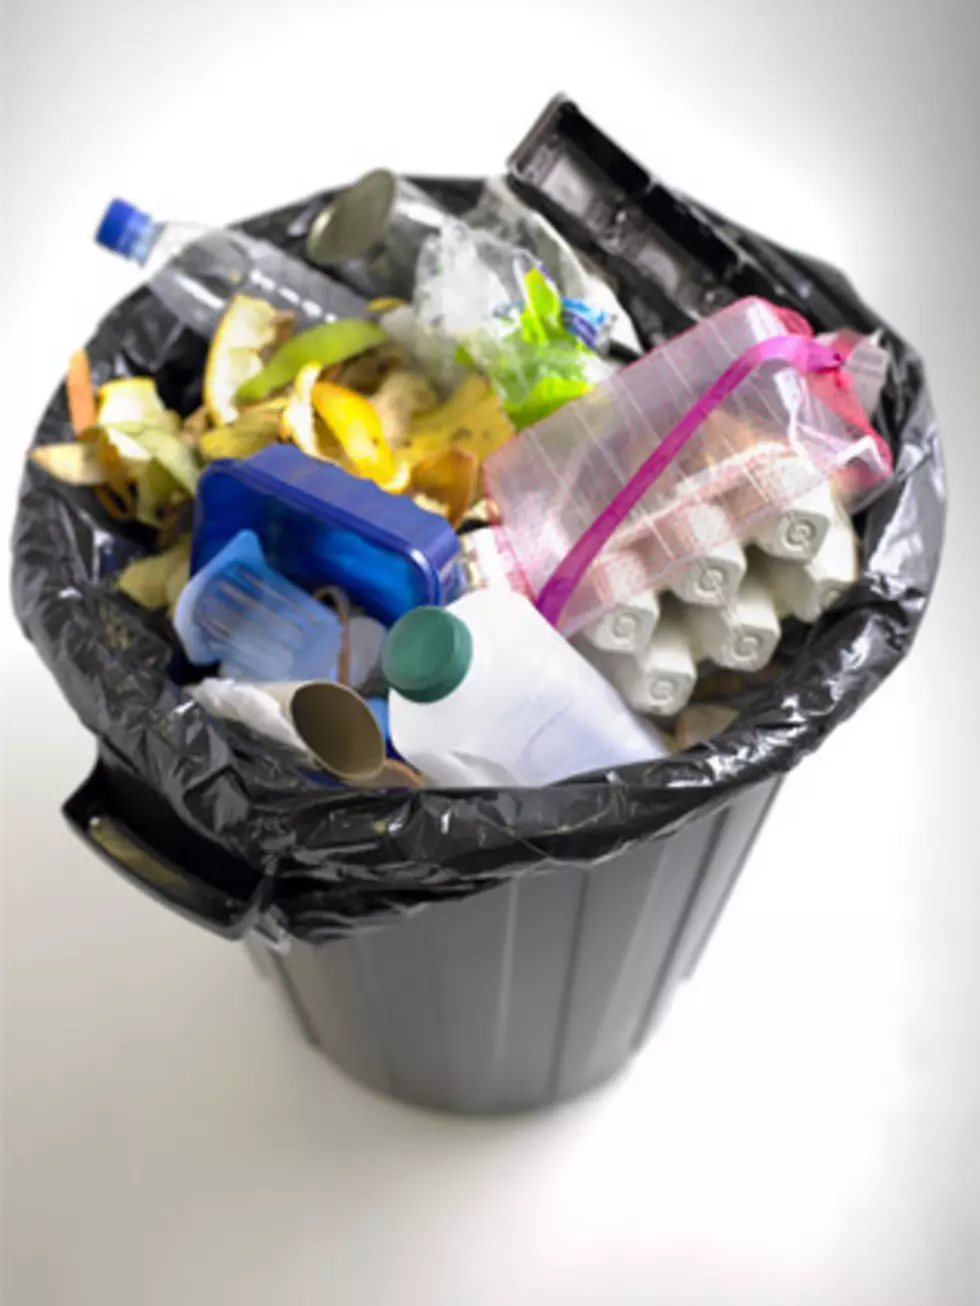 13 Things You Need To Throw Away Immediately [VIDEO]